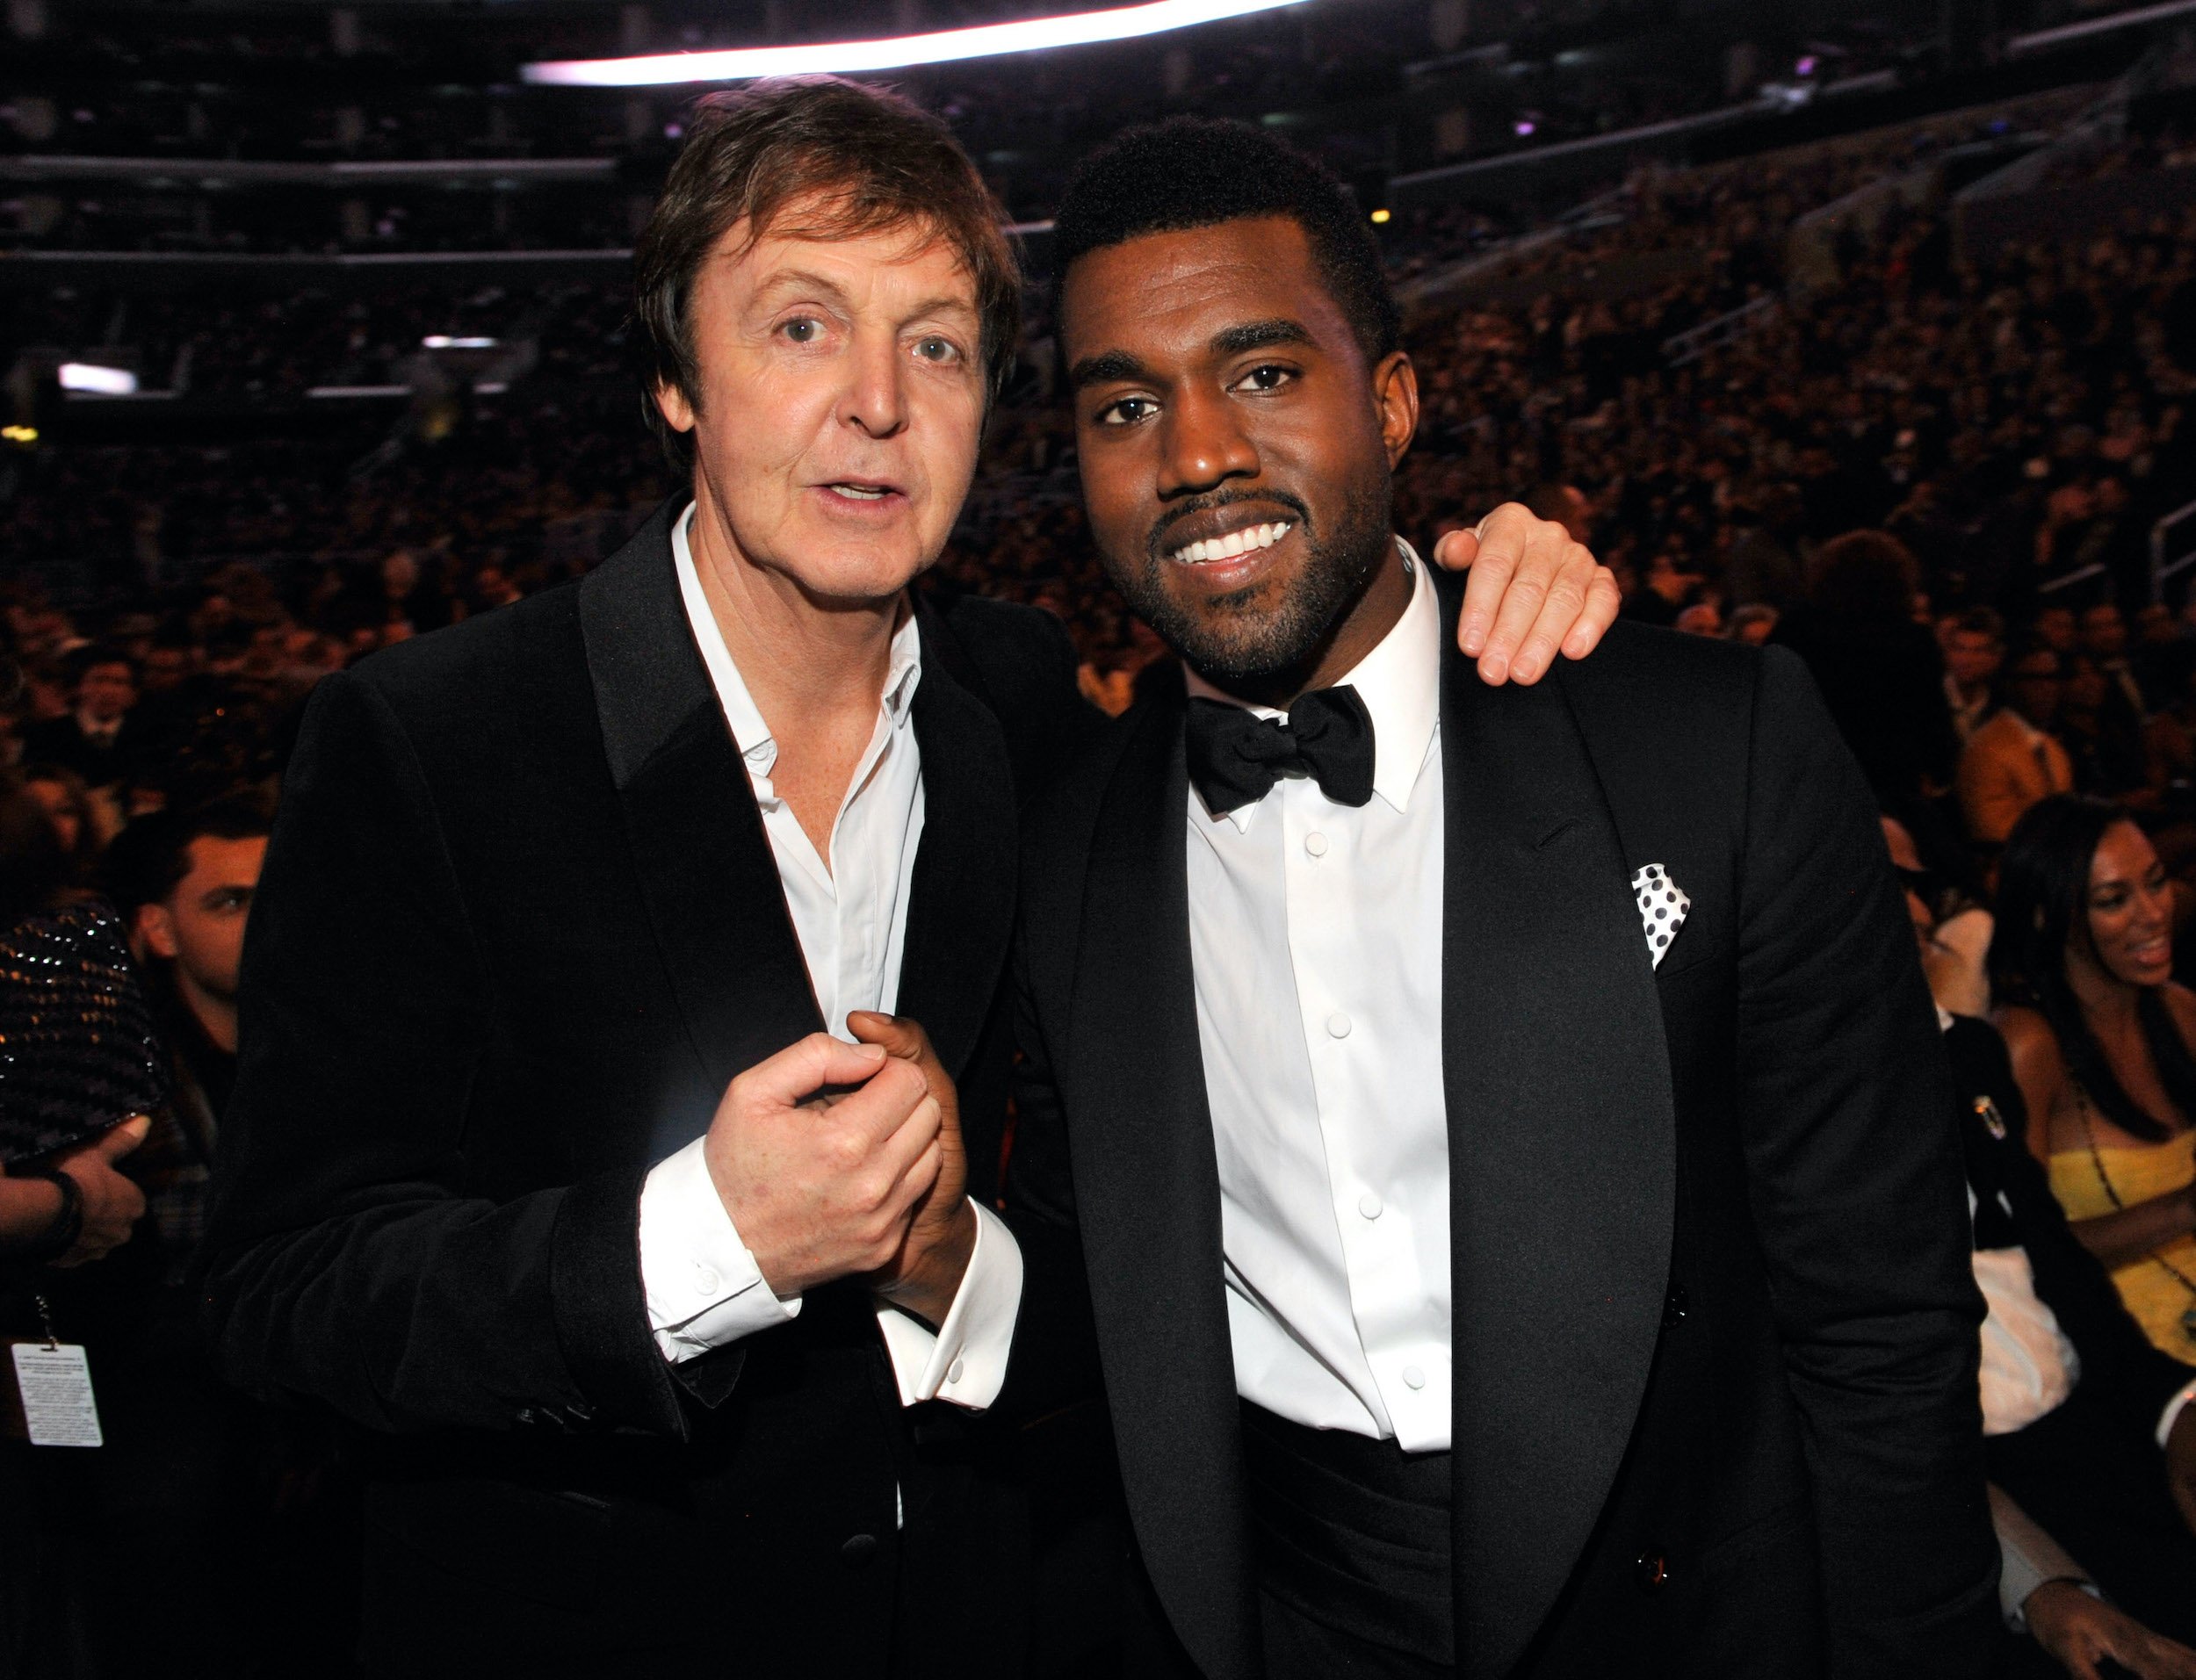 Paul McCartney and Kanye West attending the 51st Annual Grammy Awards